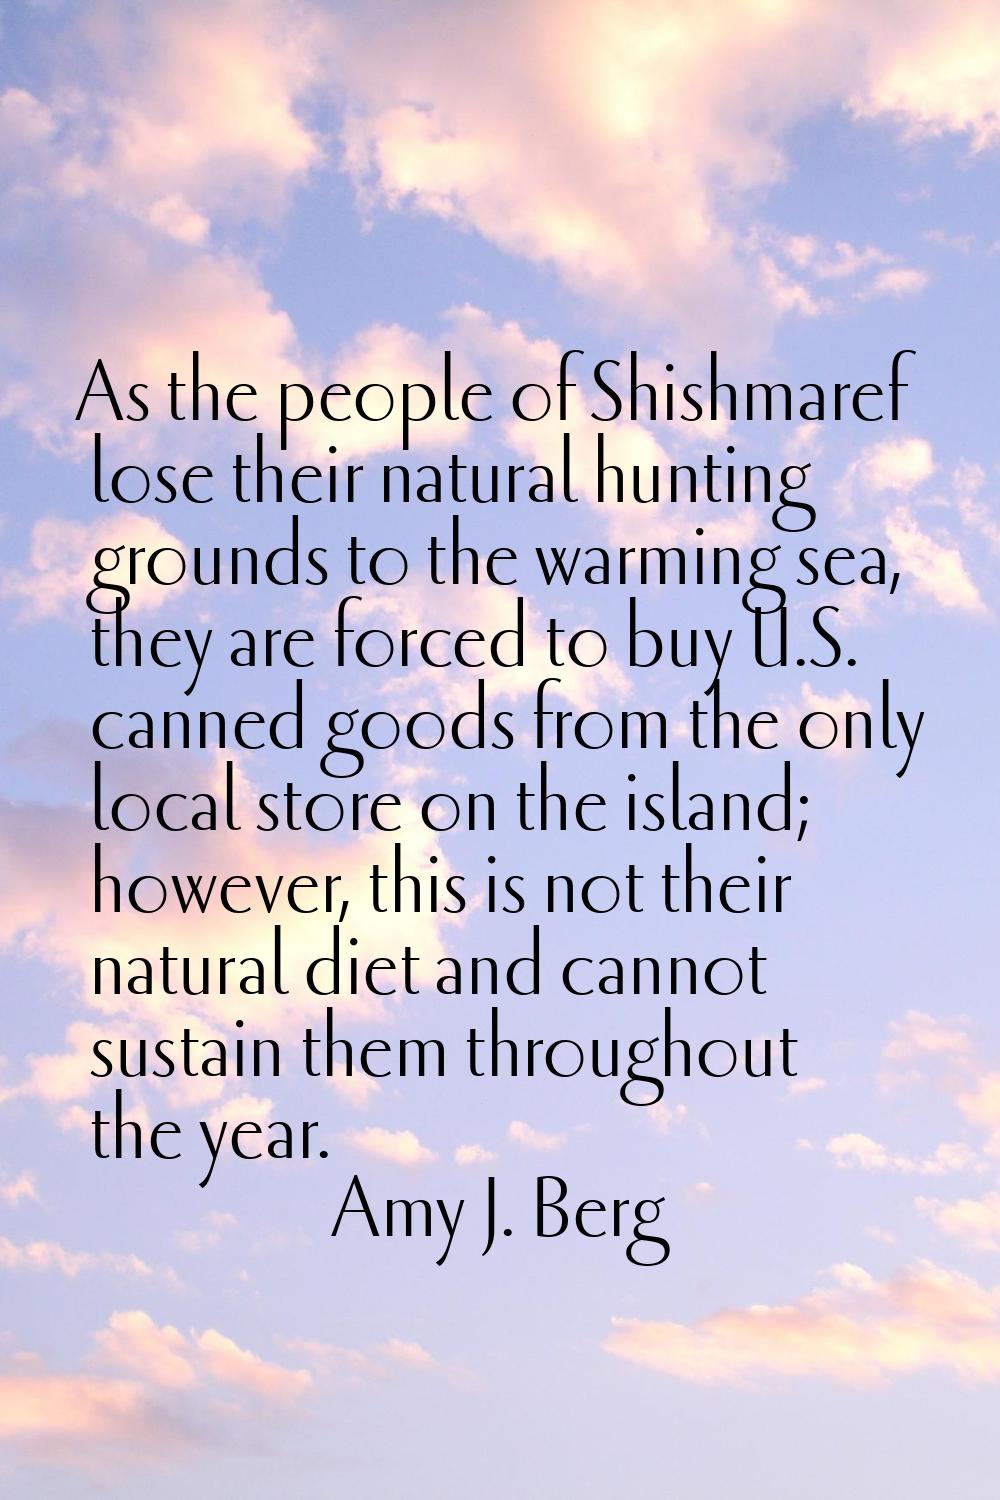 As the people of Shishmaref lose their natural hunting grounds to the warming sea, they are forced 